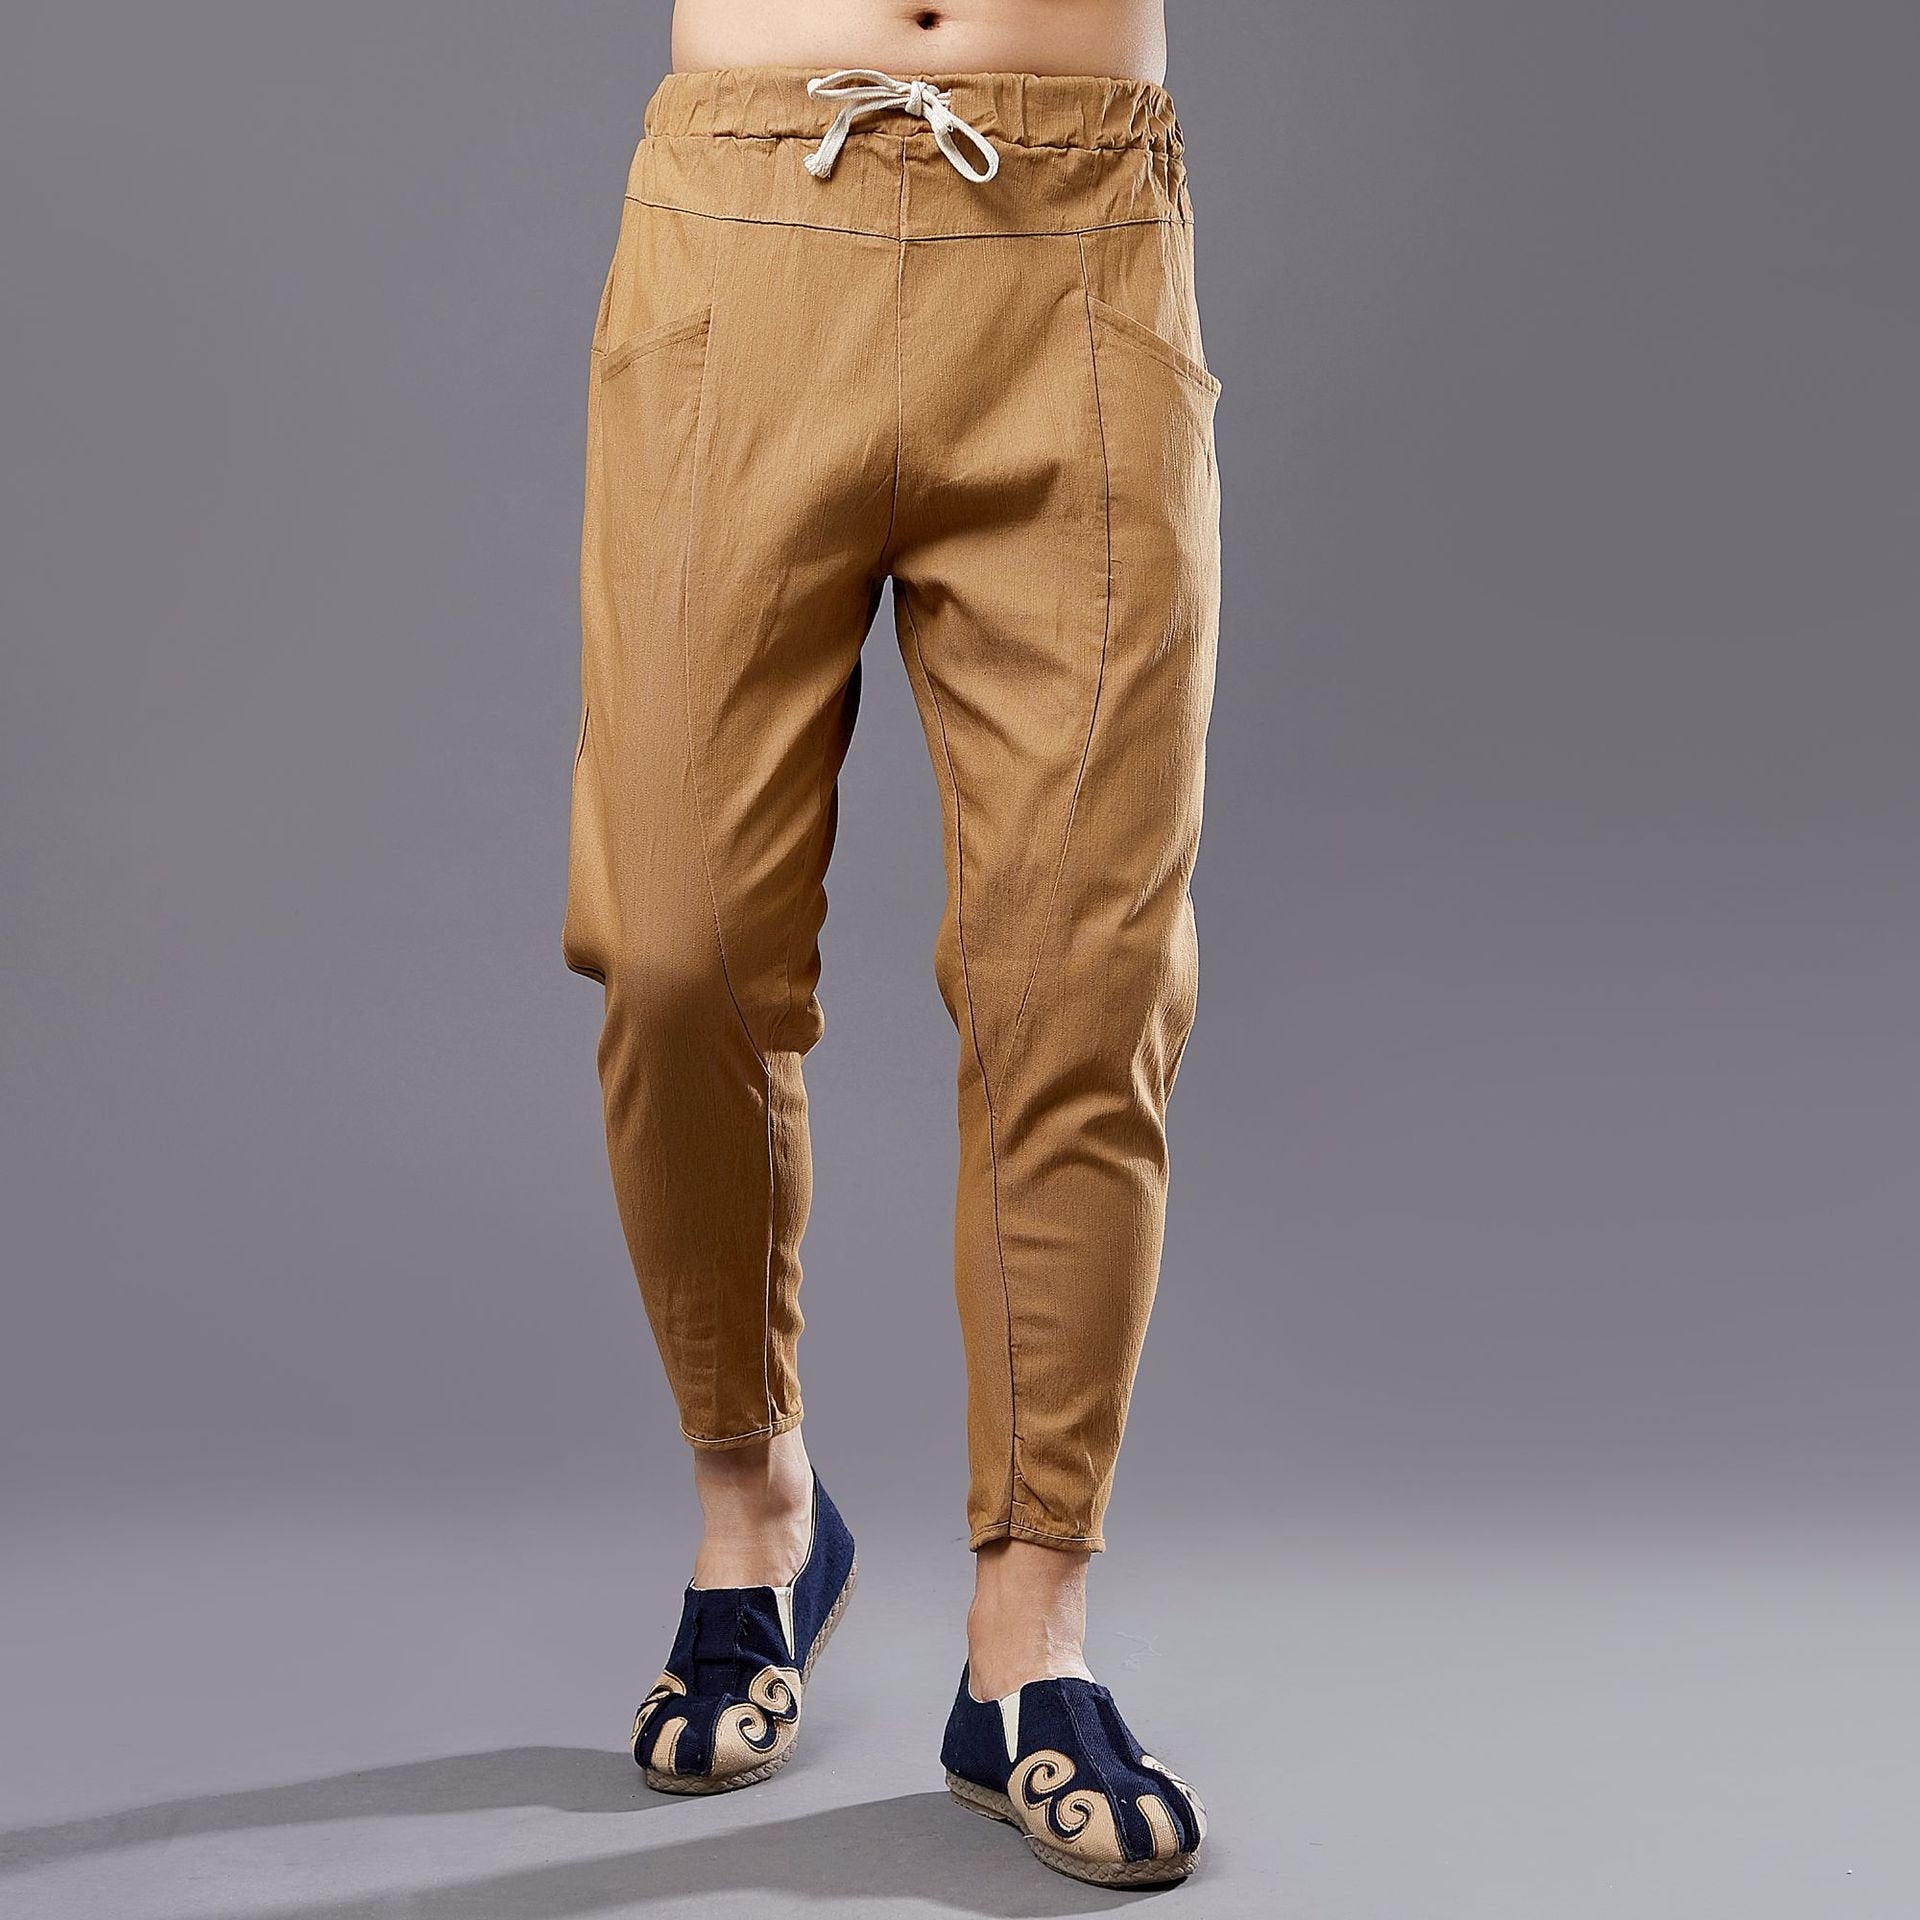 Men New Style Causal Linen and Cotton Capri Small Leg Opening